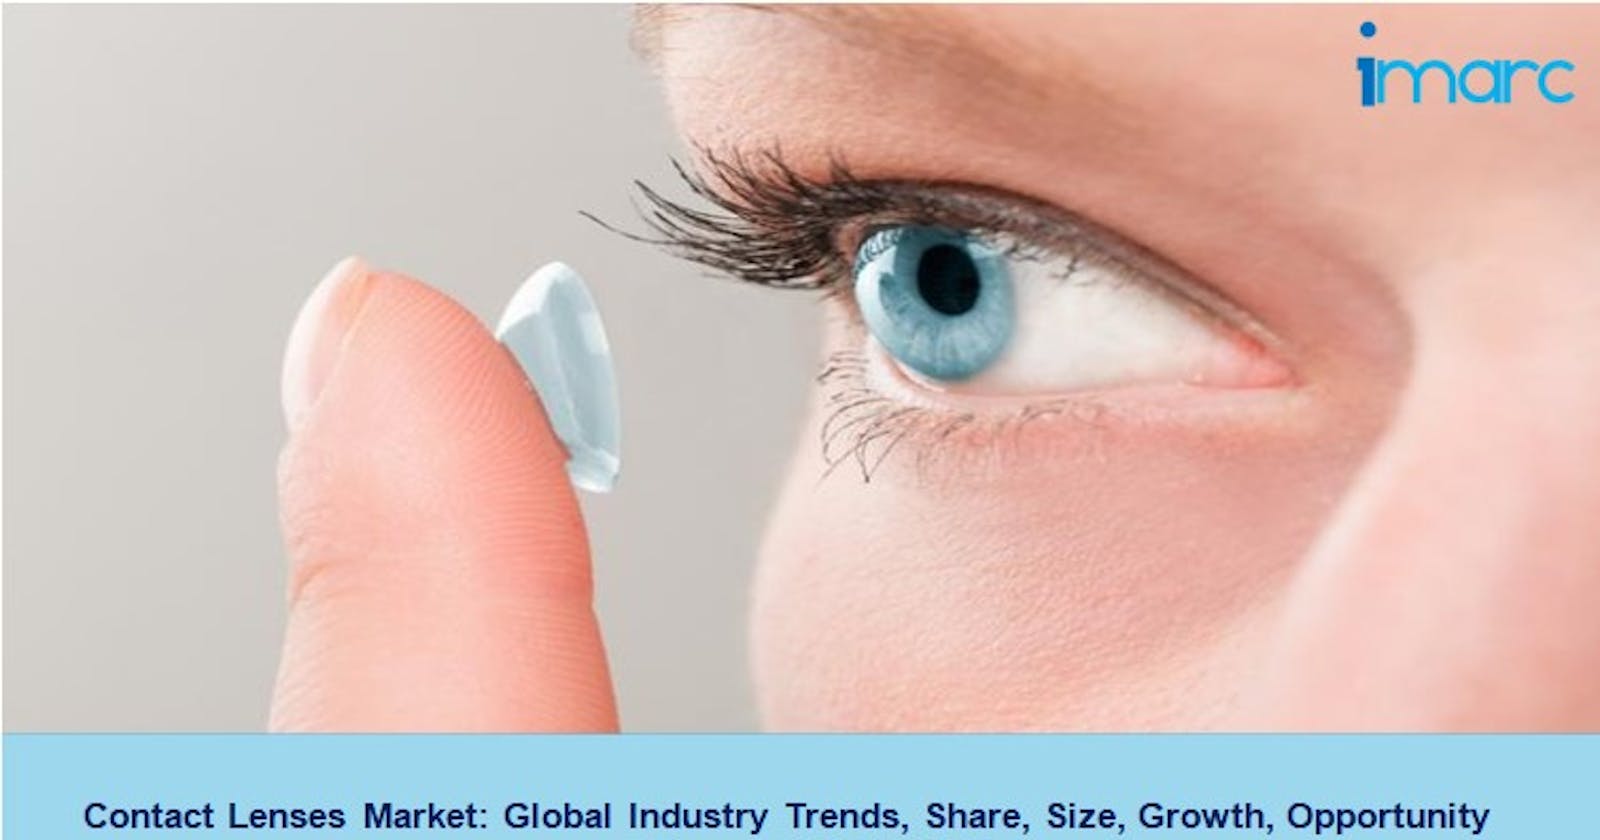 Contact Lenses Market Trends, Demand, Share and Analysis Report 2022-2027